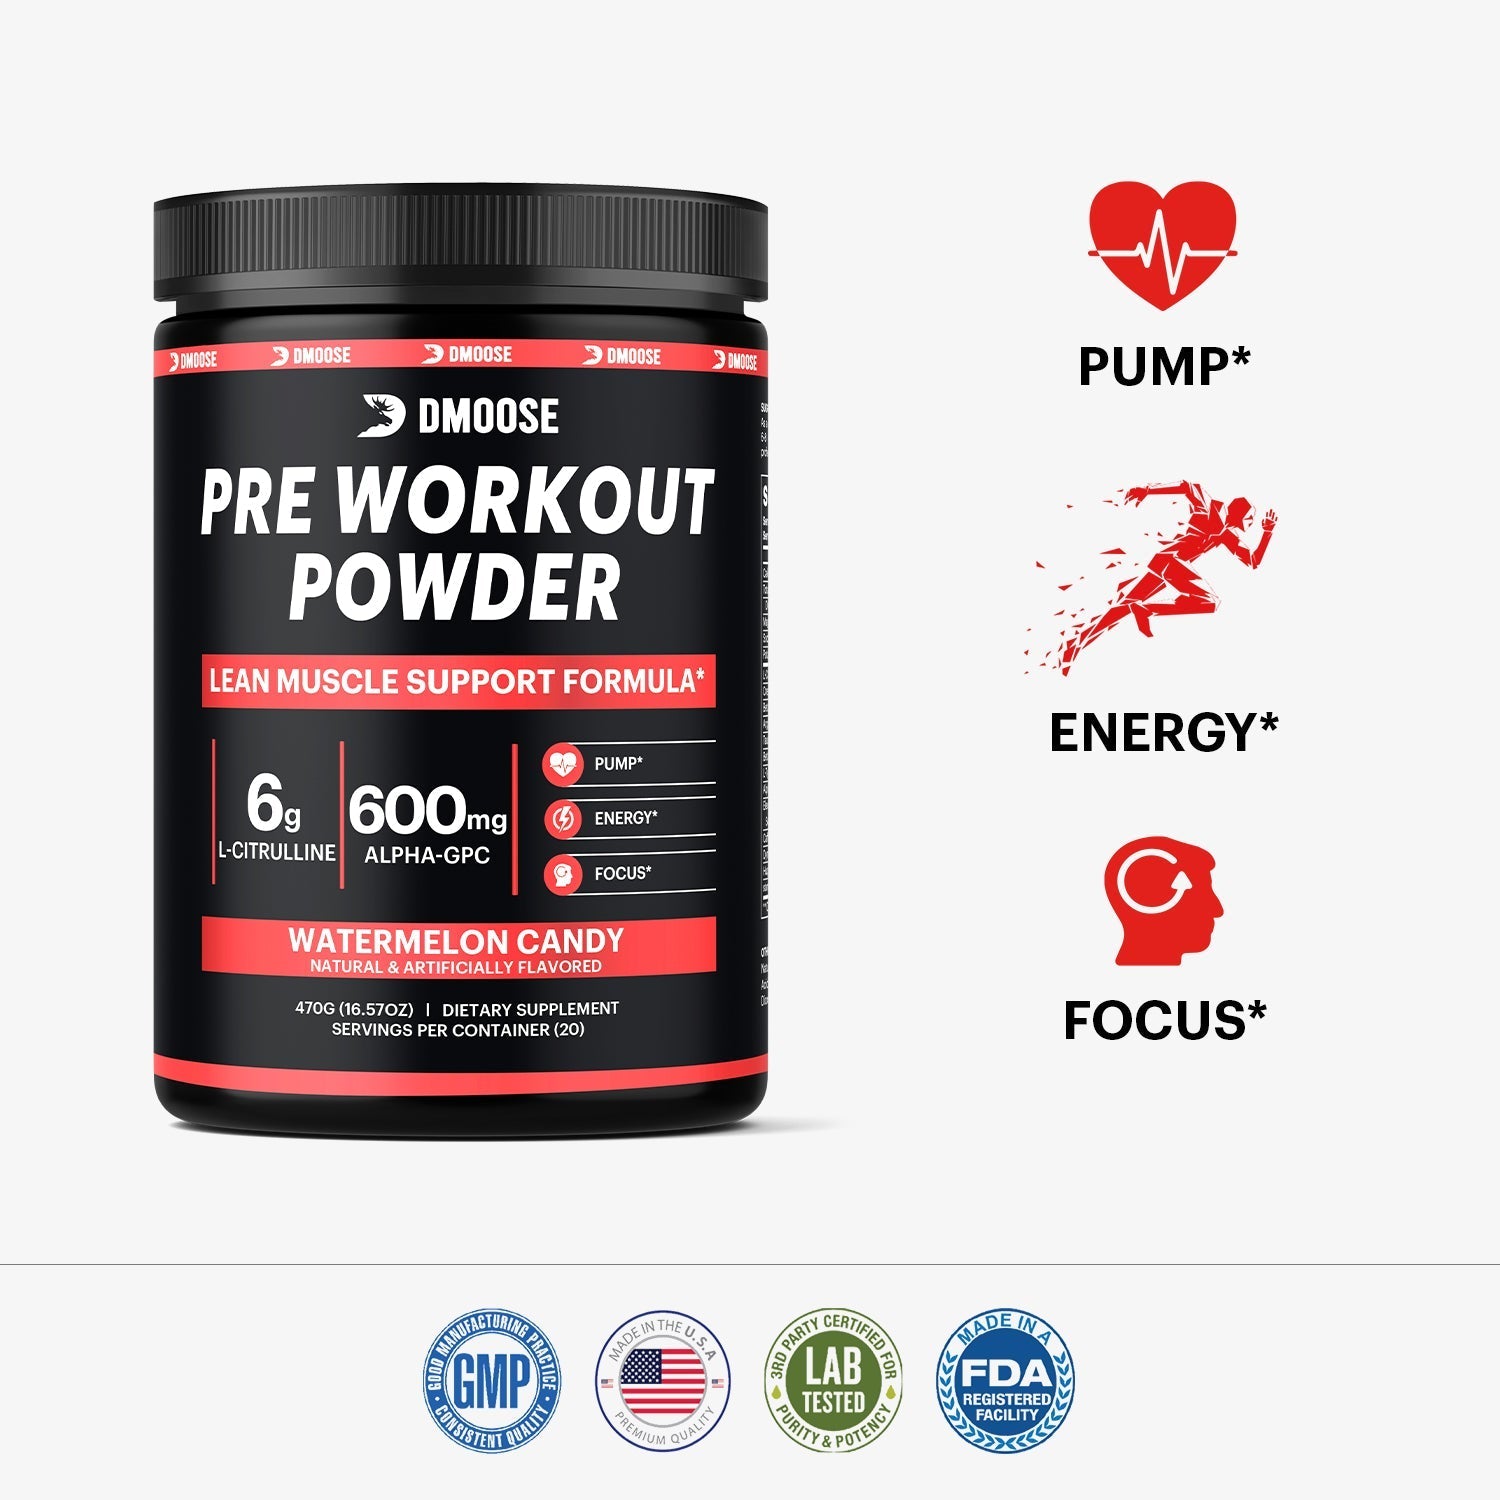 Is Pre-Workout Powder Safe? Does It Work?